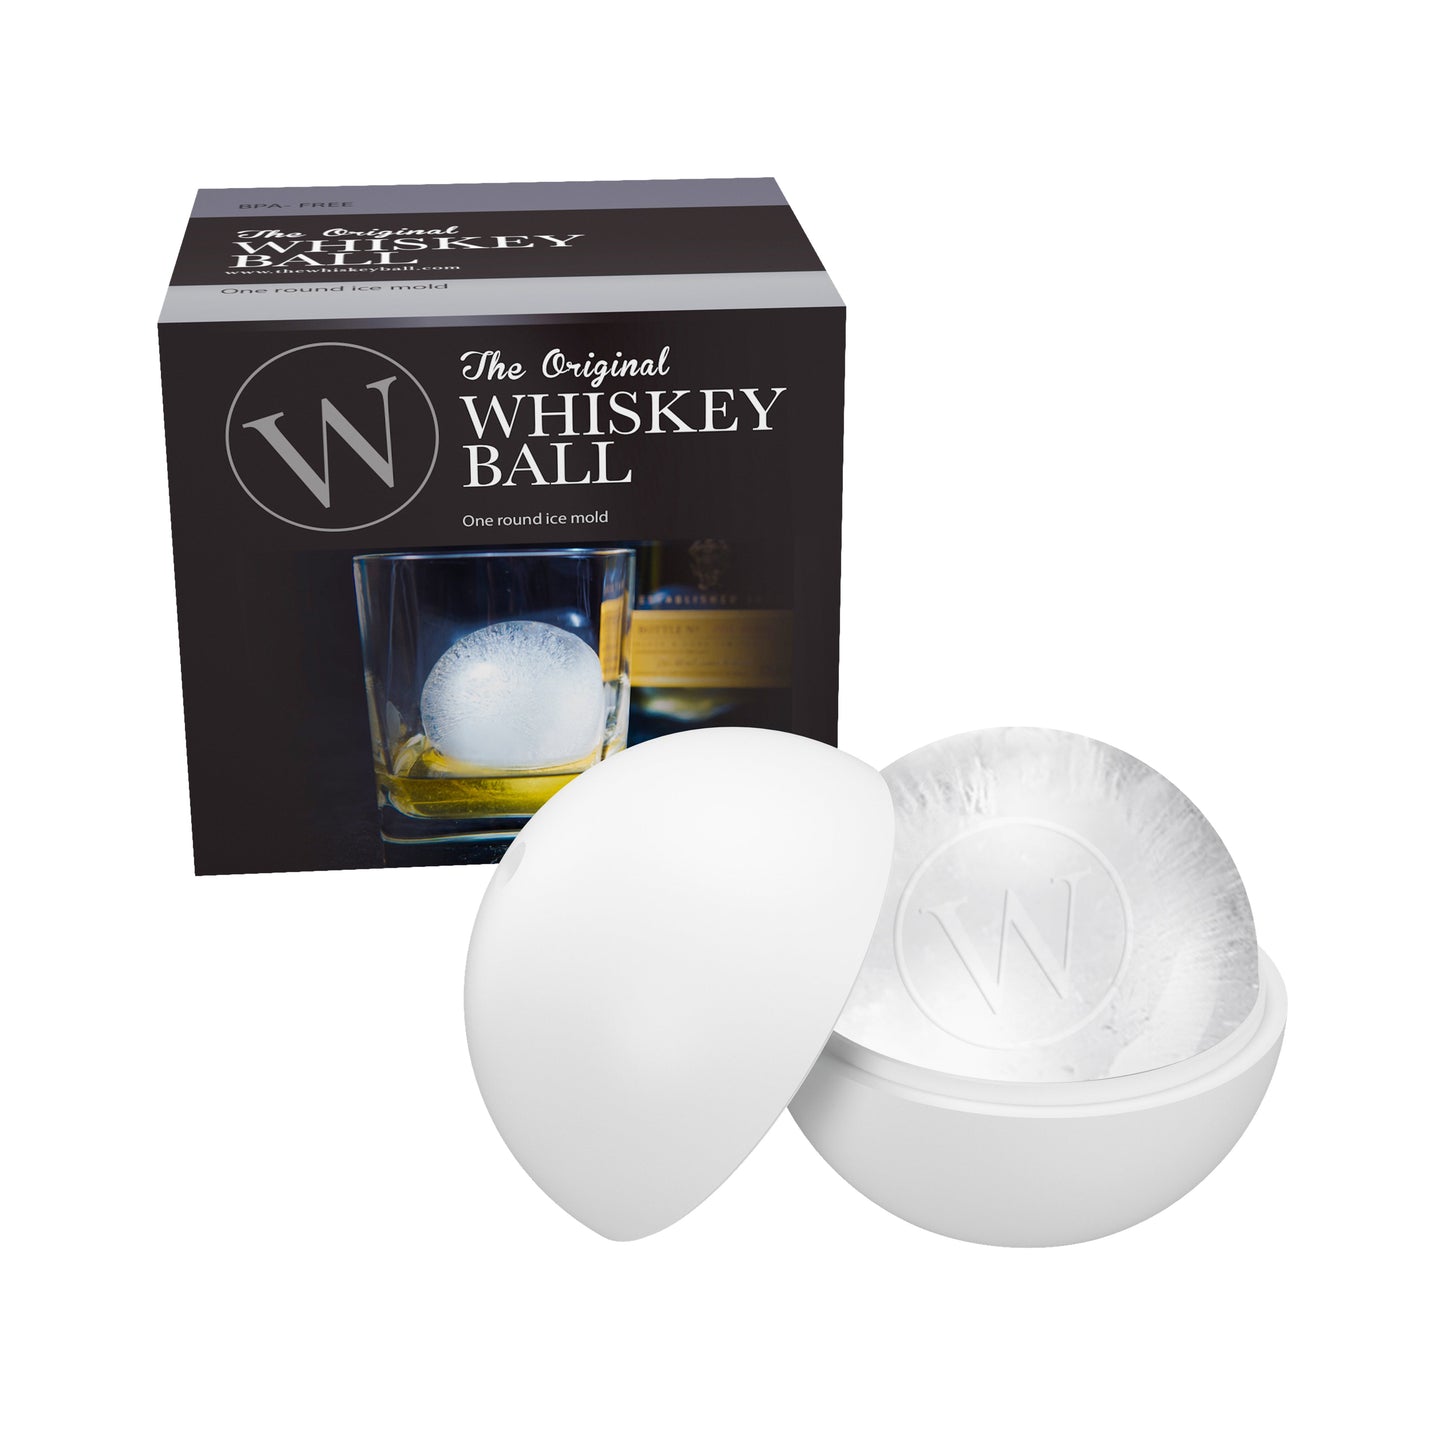 The Original Whiskey Ball - 1 Pack by The Whiskey Ball